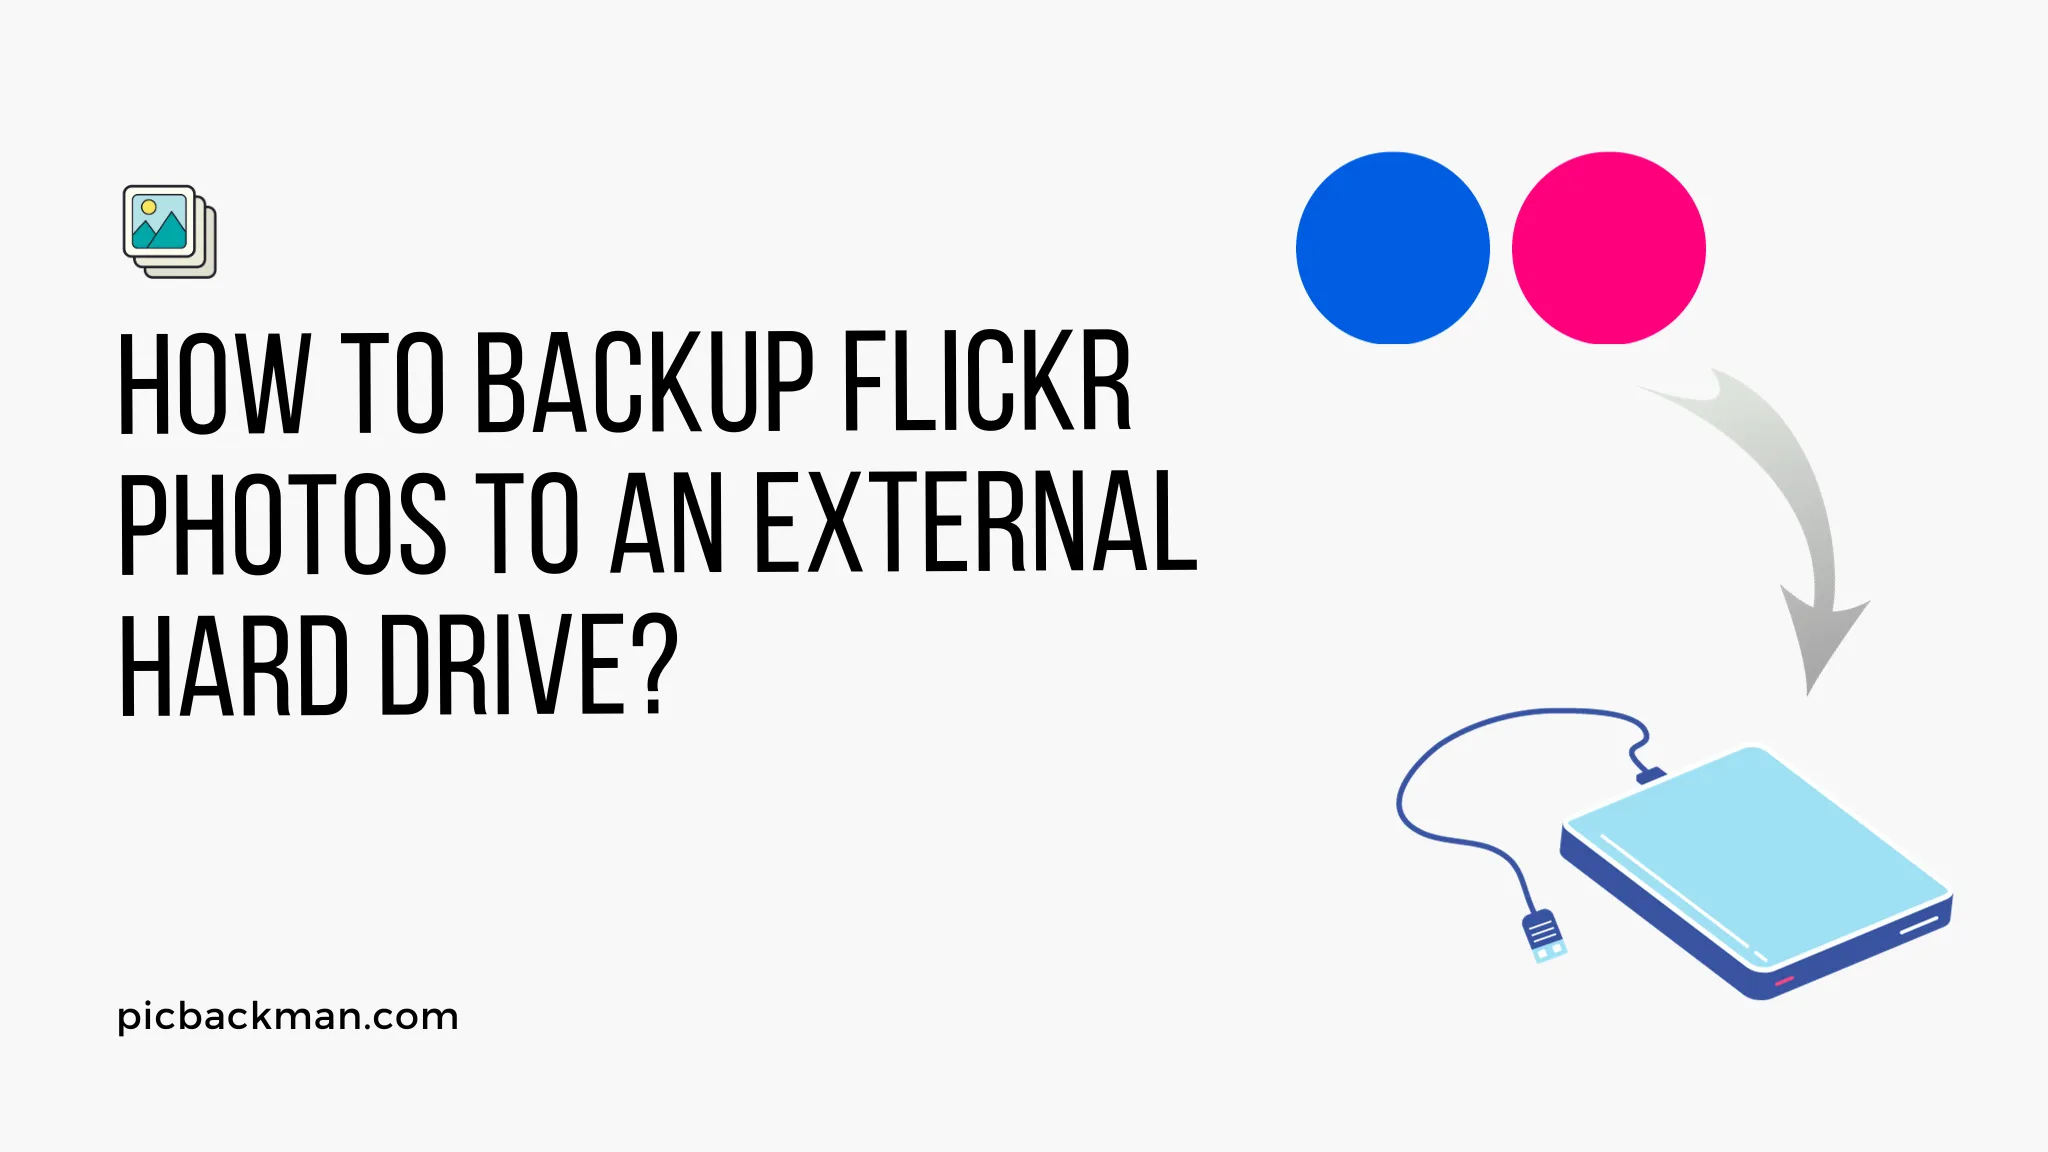 How to Backup Flickr Photos to an External Hard Drive?